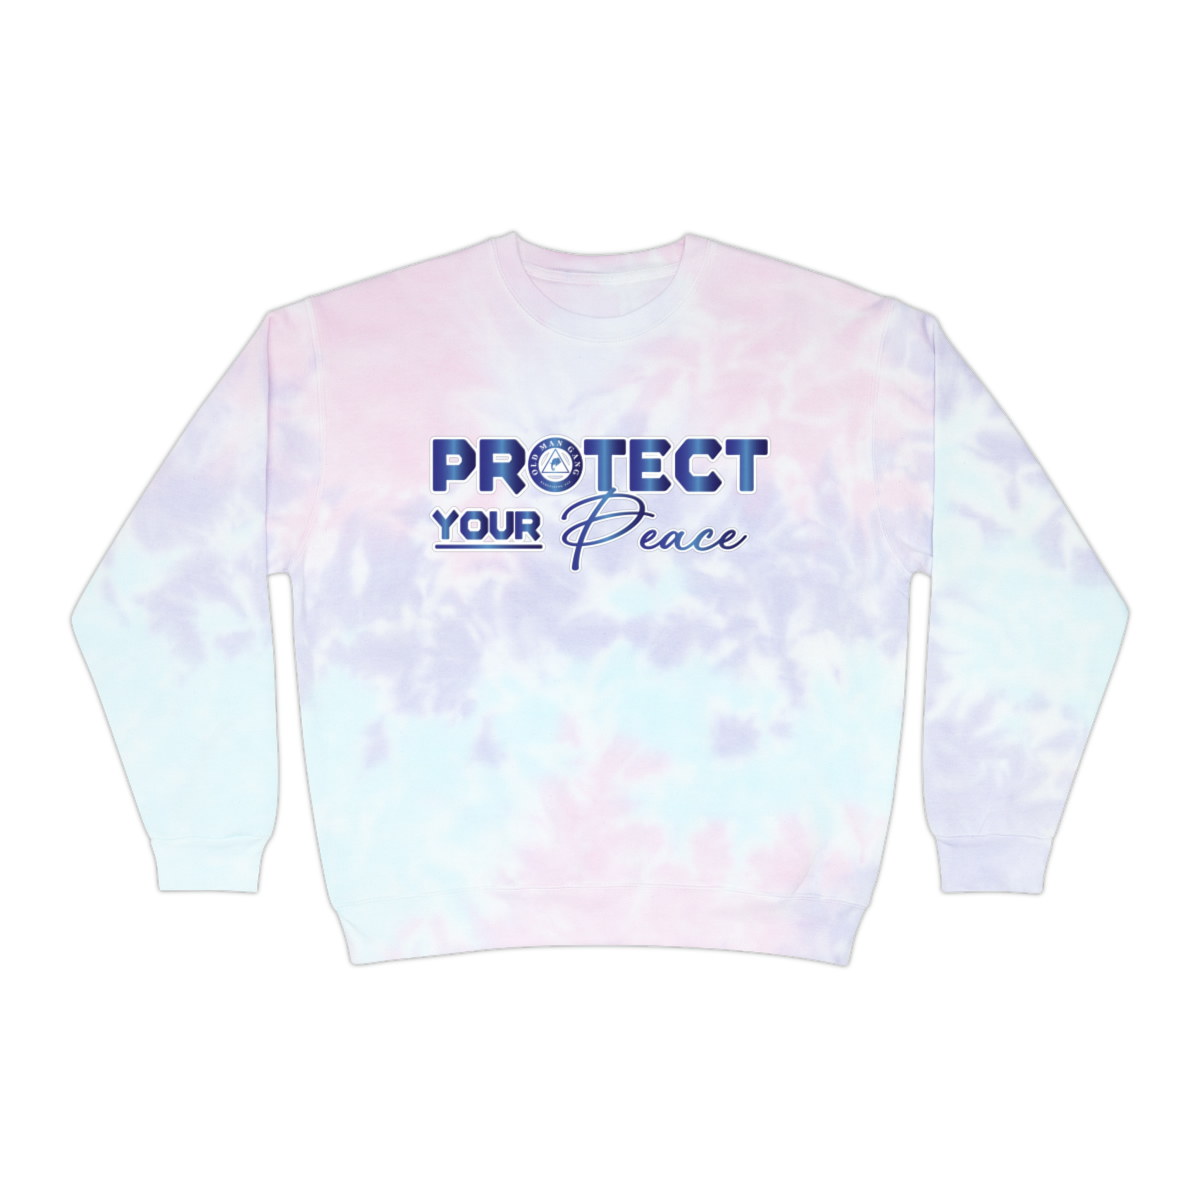 A white sweatshirt with the words protect your place on it.